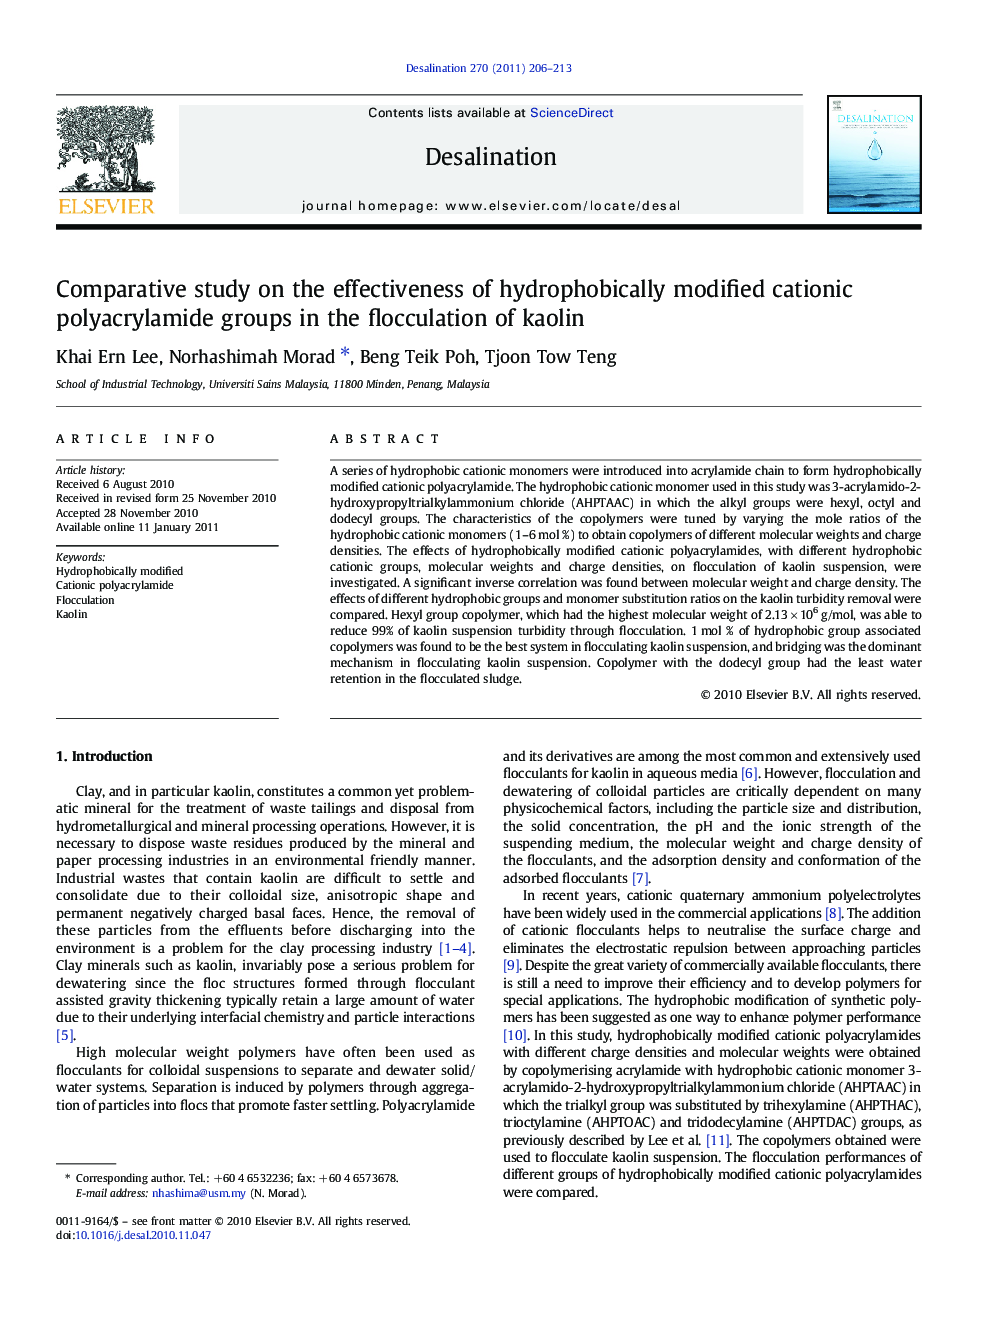 Comparative study on the effectiveness of hydrophobically modified cationic polyacrylamide groups in the flocculation of kaolin